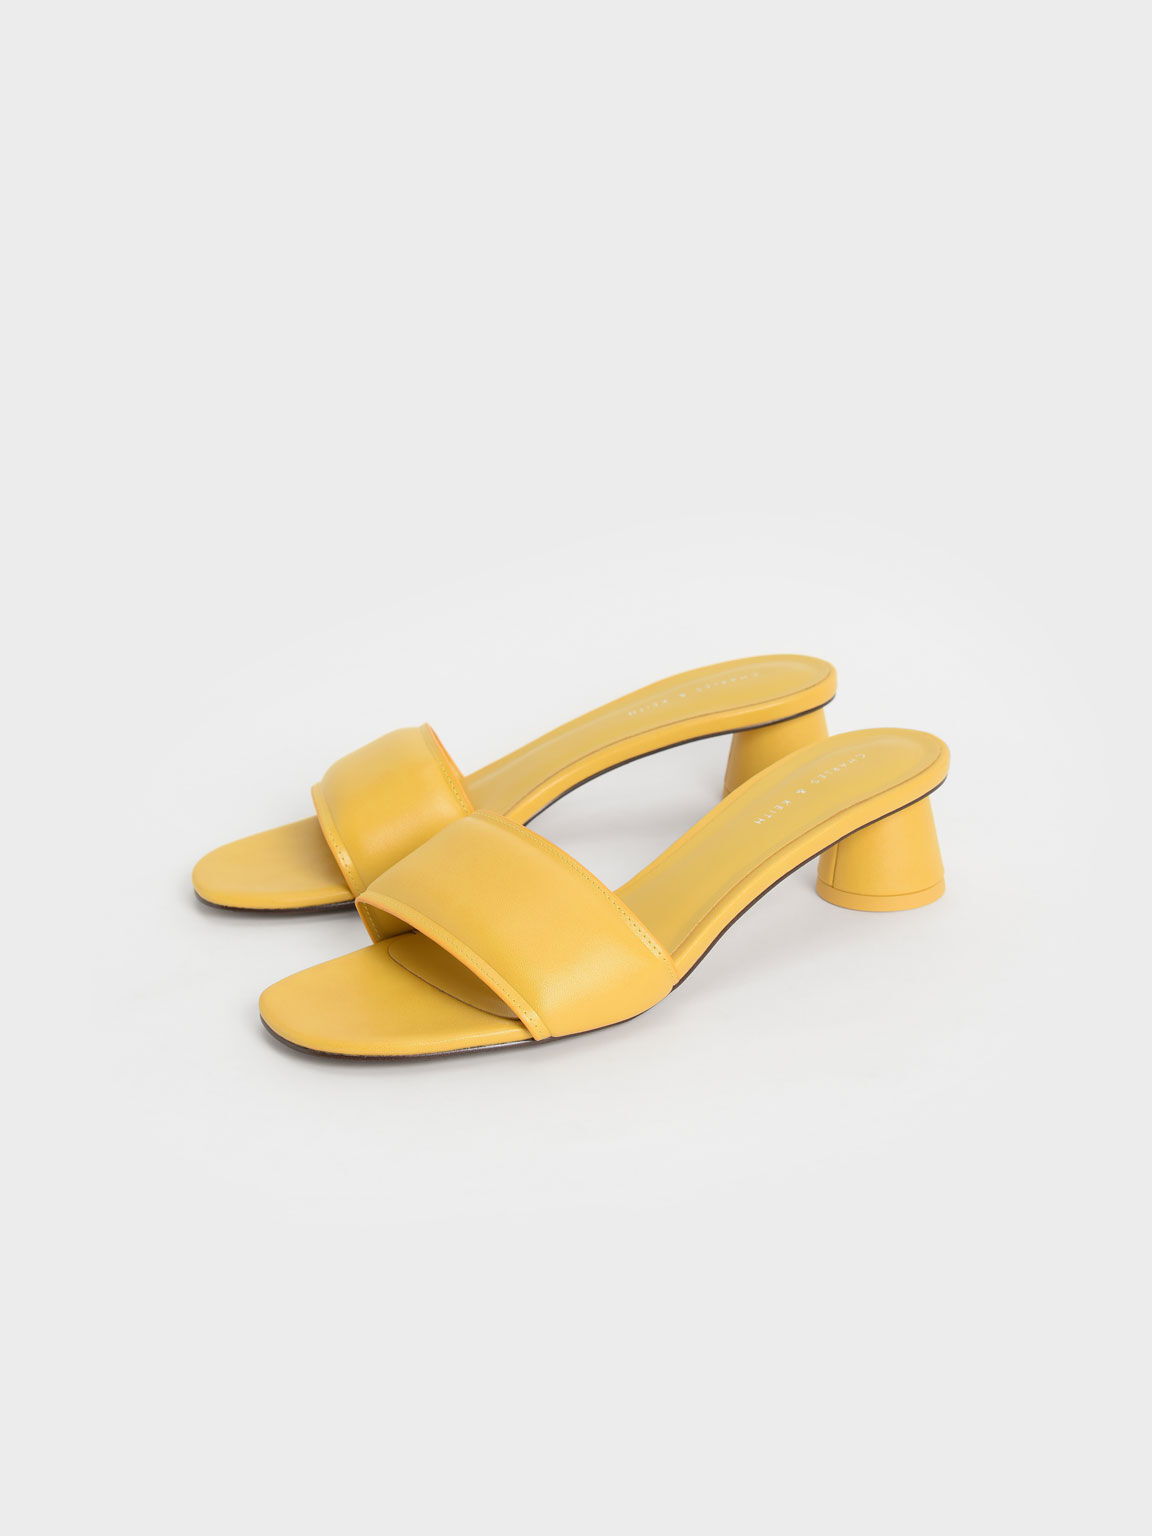 Puffy Cylindrical Heel Mules, Mustard, hi-res